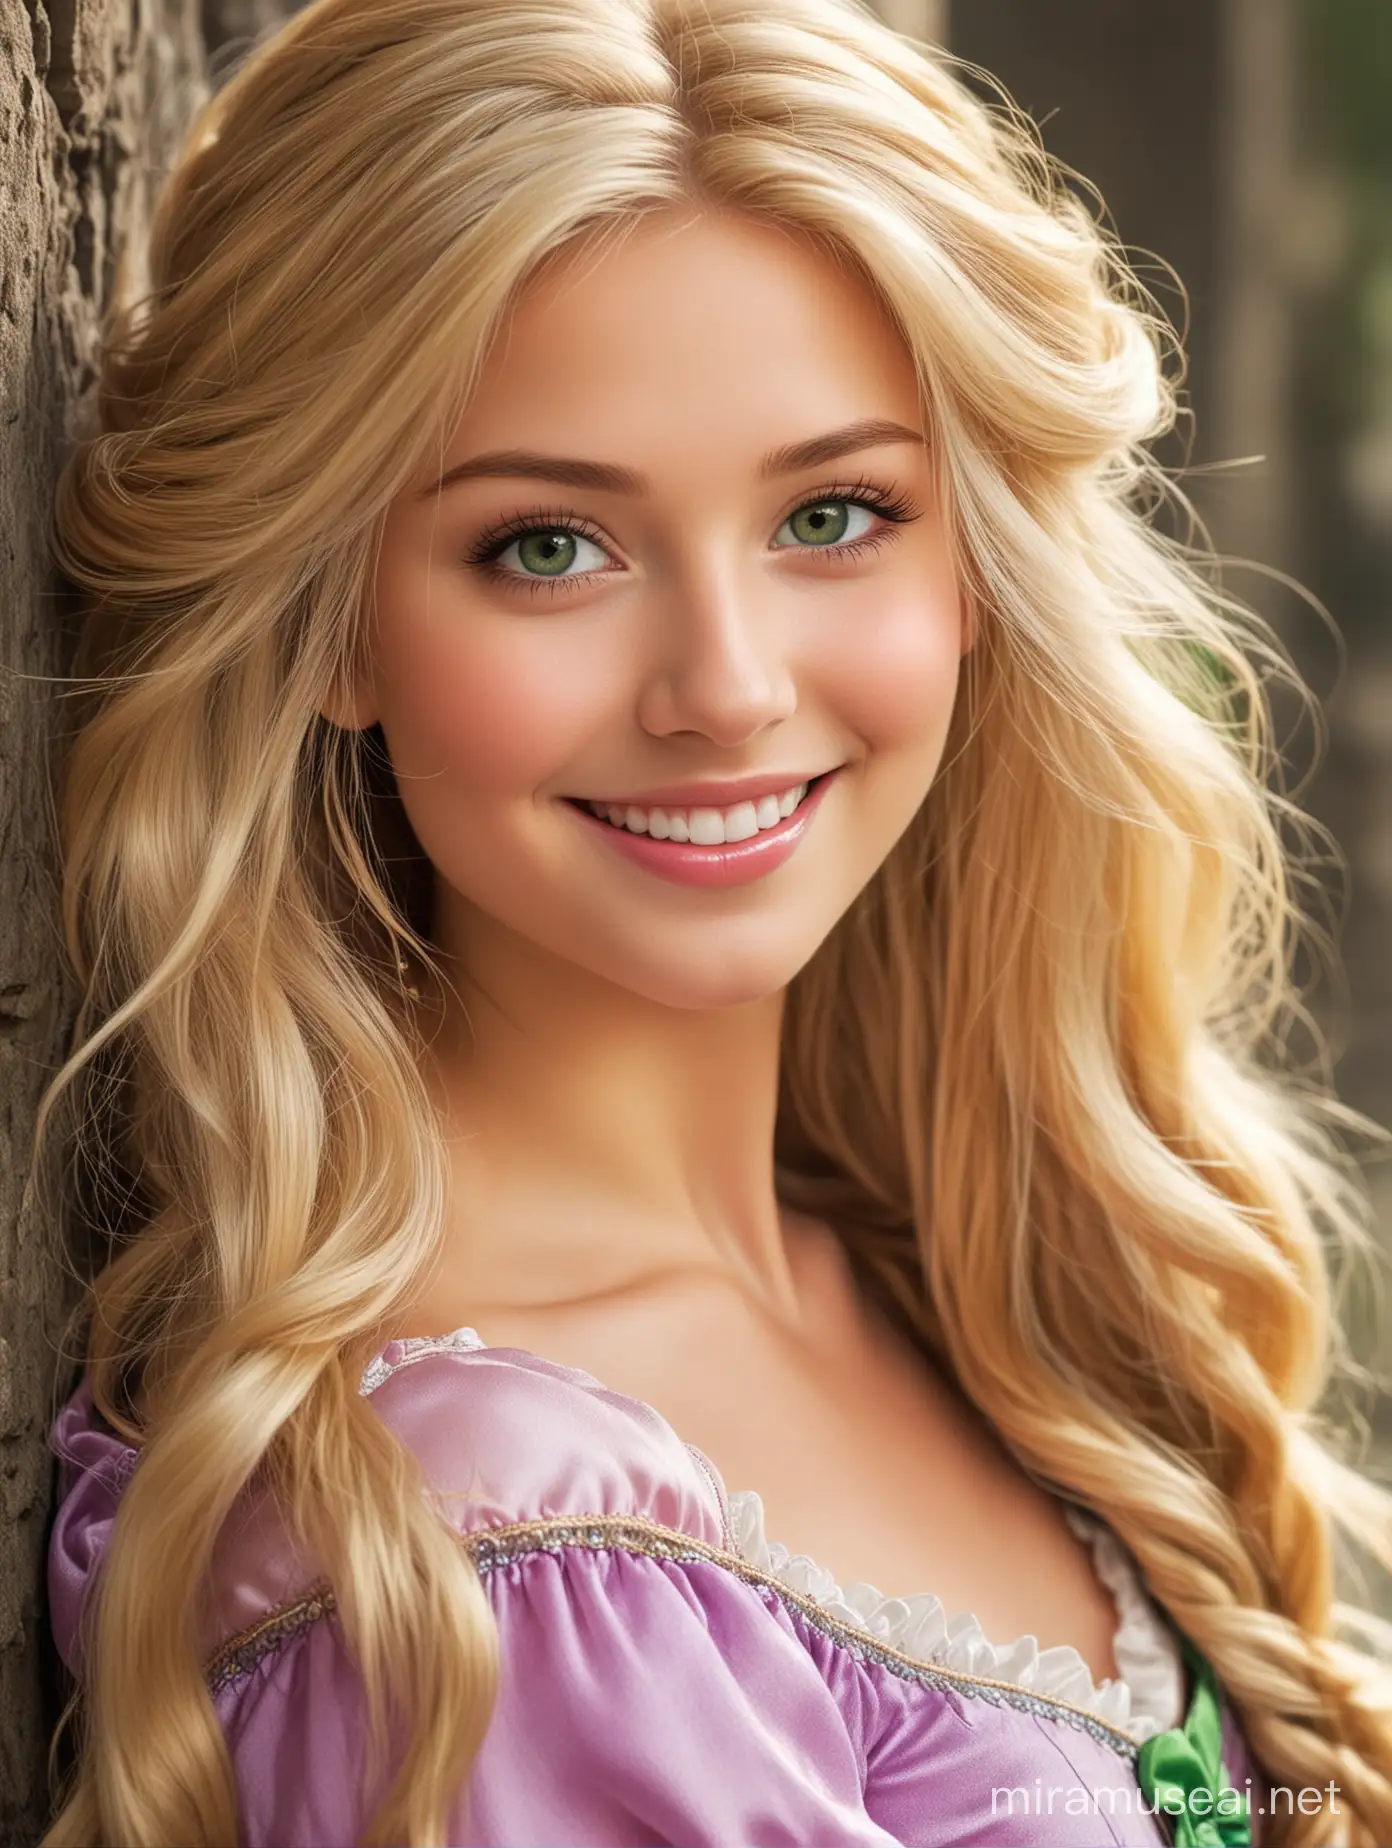 Enchanting Princess Rapunzel with Blonde Hair and Green Eyes Smiling